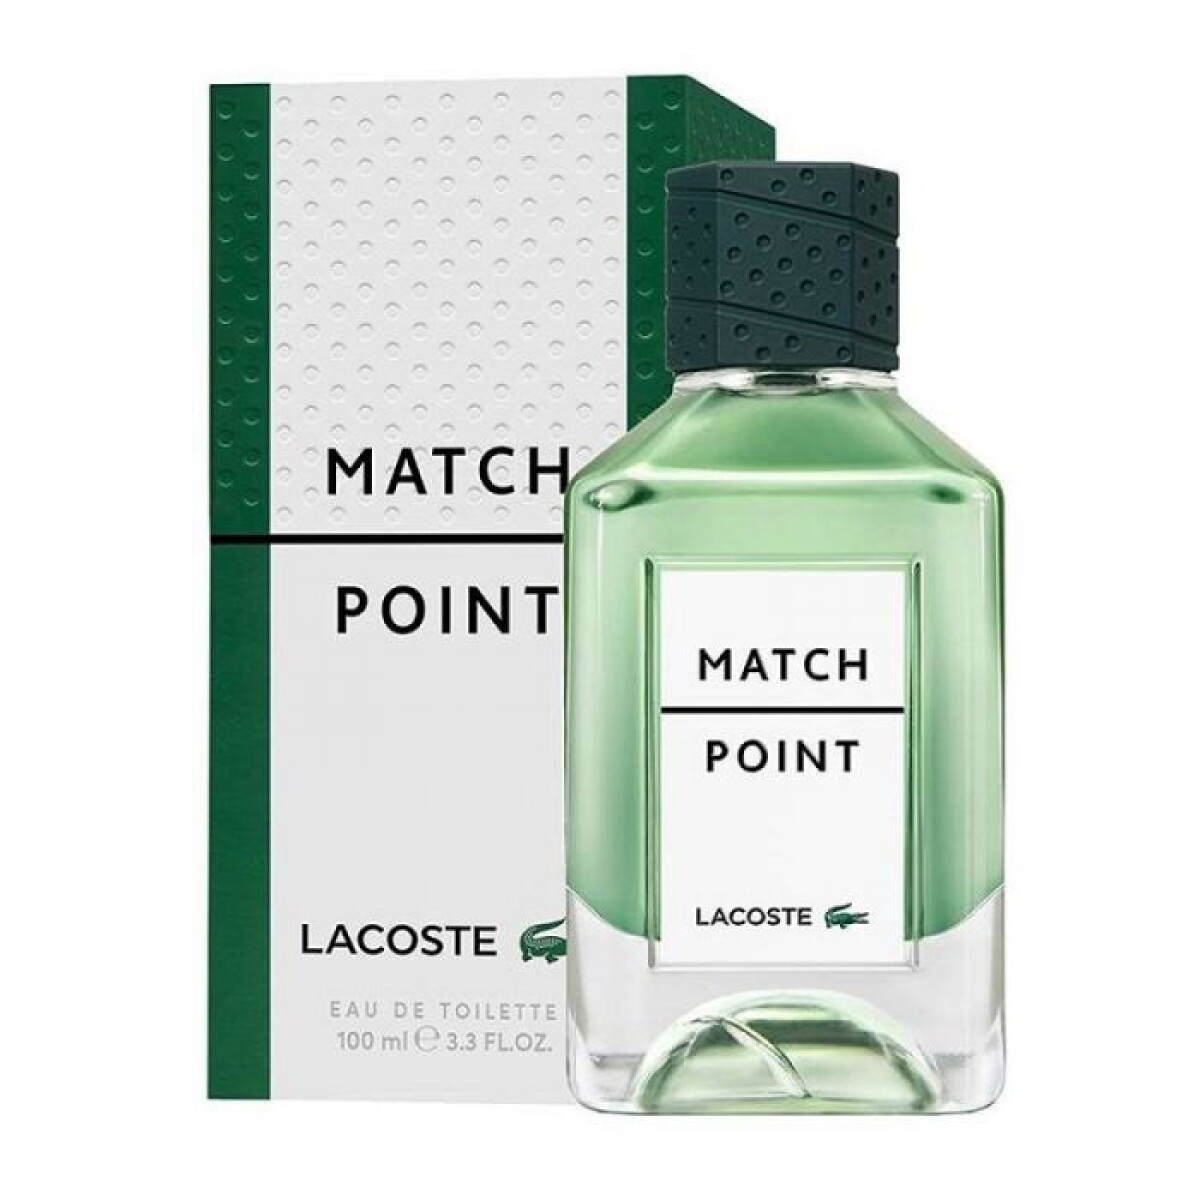 Perfume Match Point Lacoste Edt 100 Ml. 